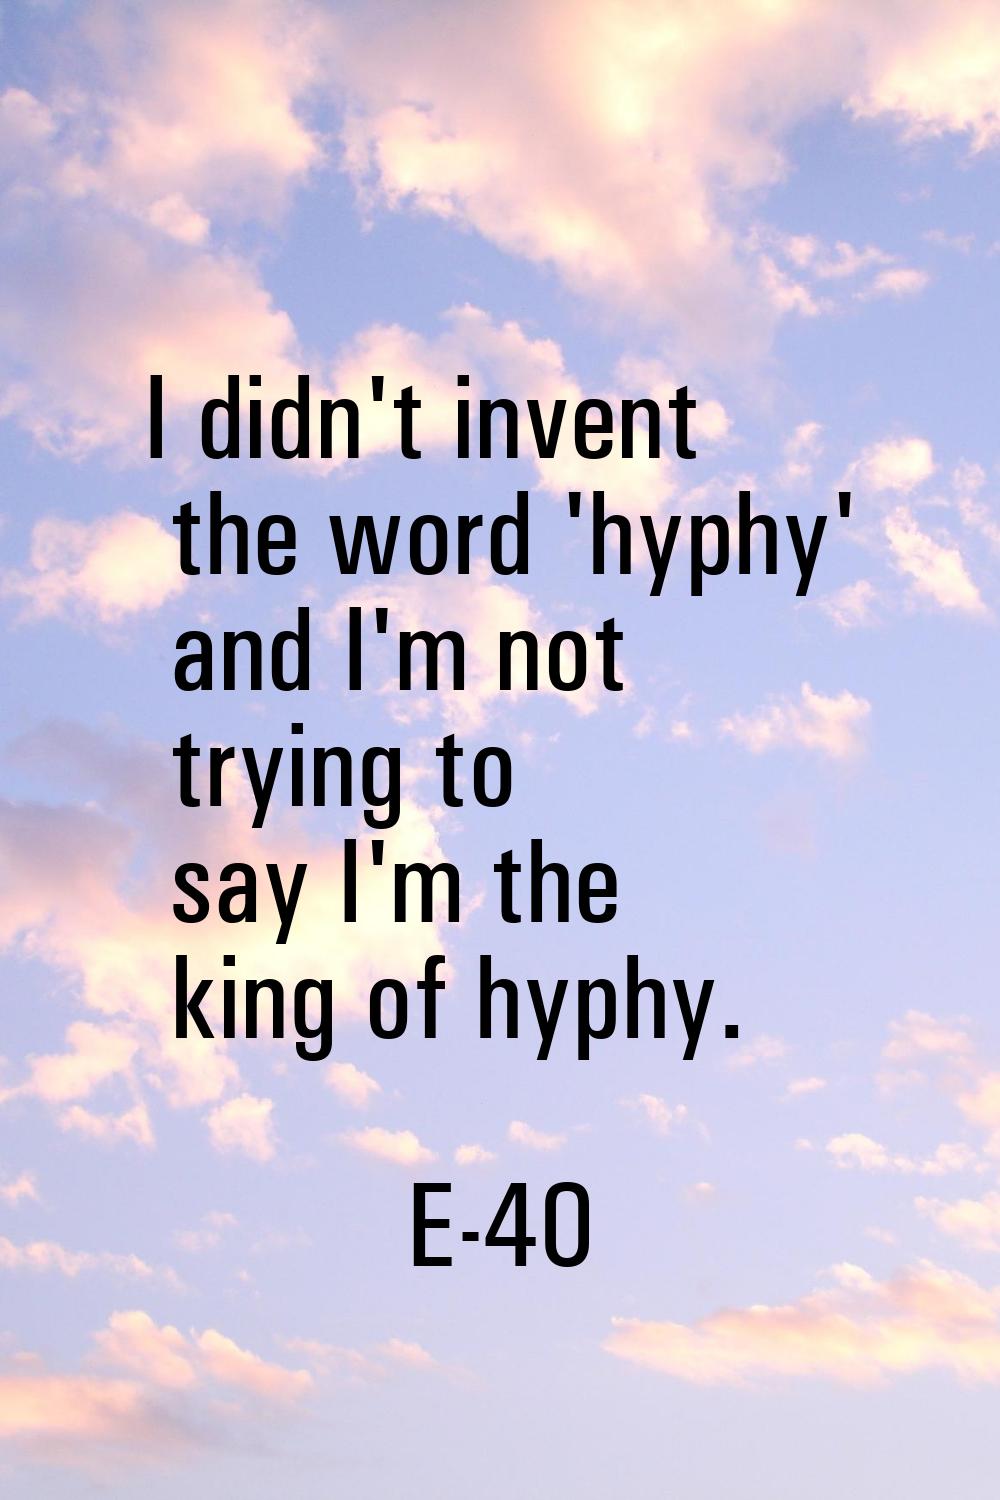 I didn't invent the word 'hyphy' and I'm not trying to say I'm the king of hyphy.